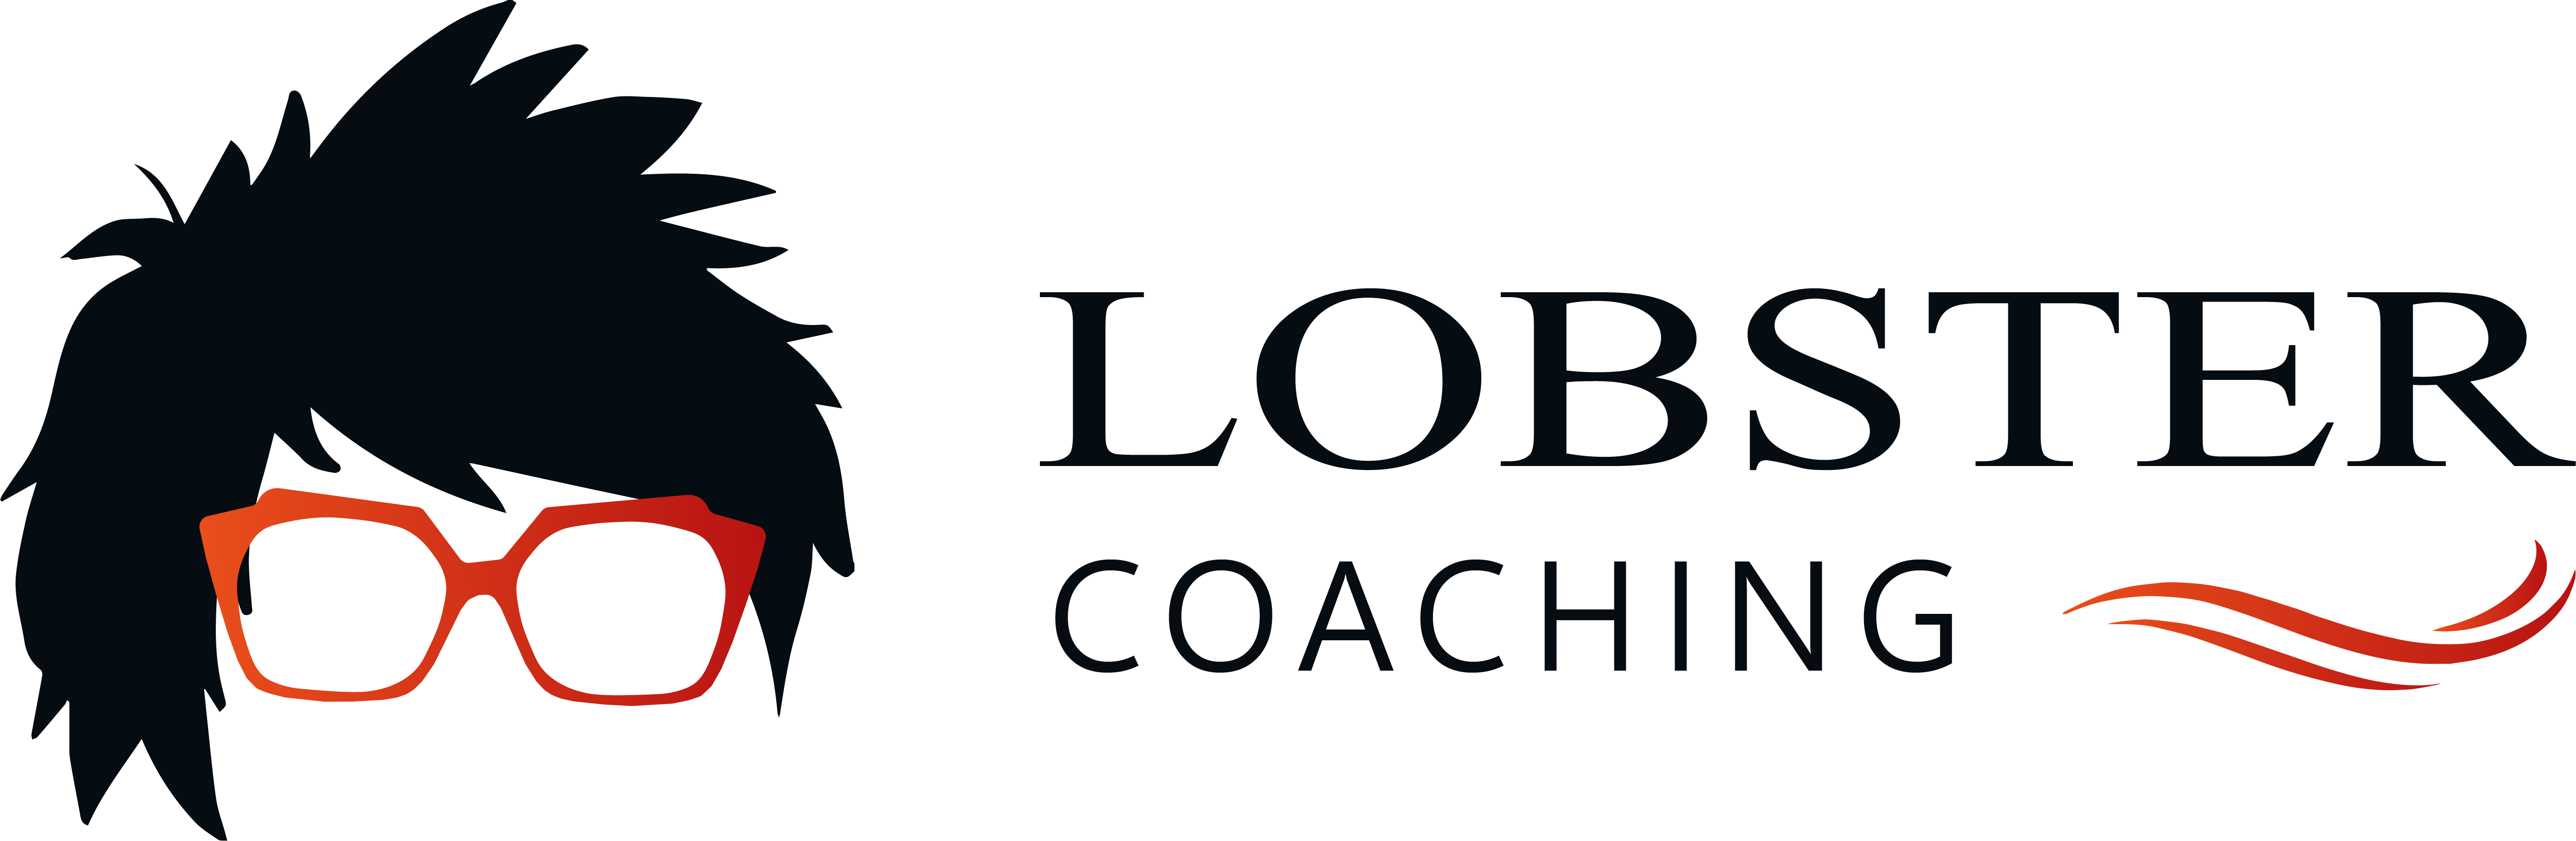 Lobster Coaching